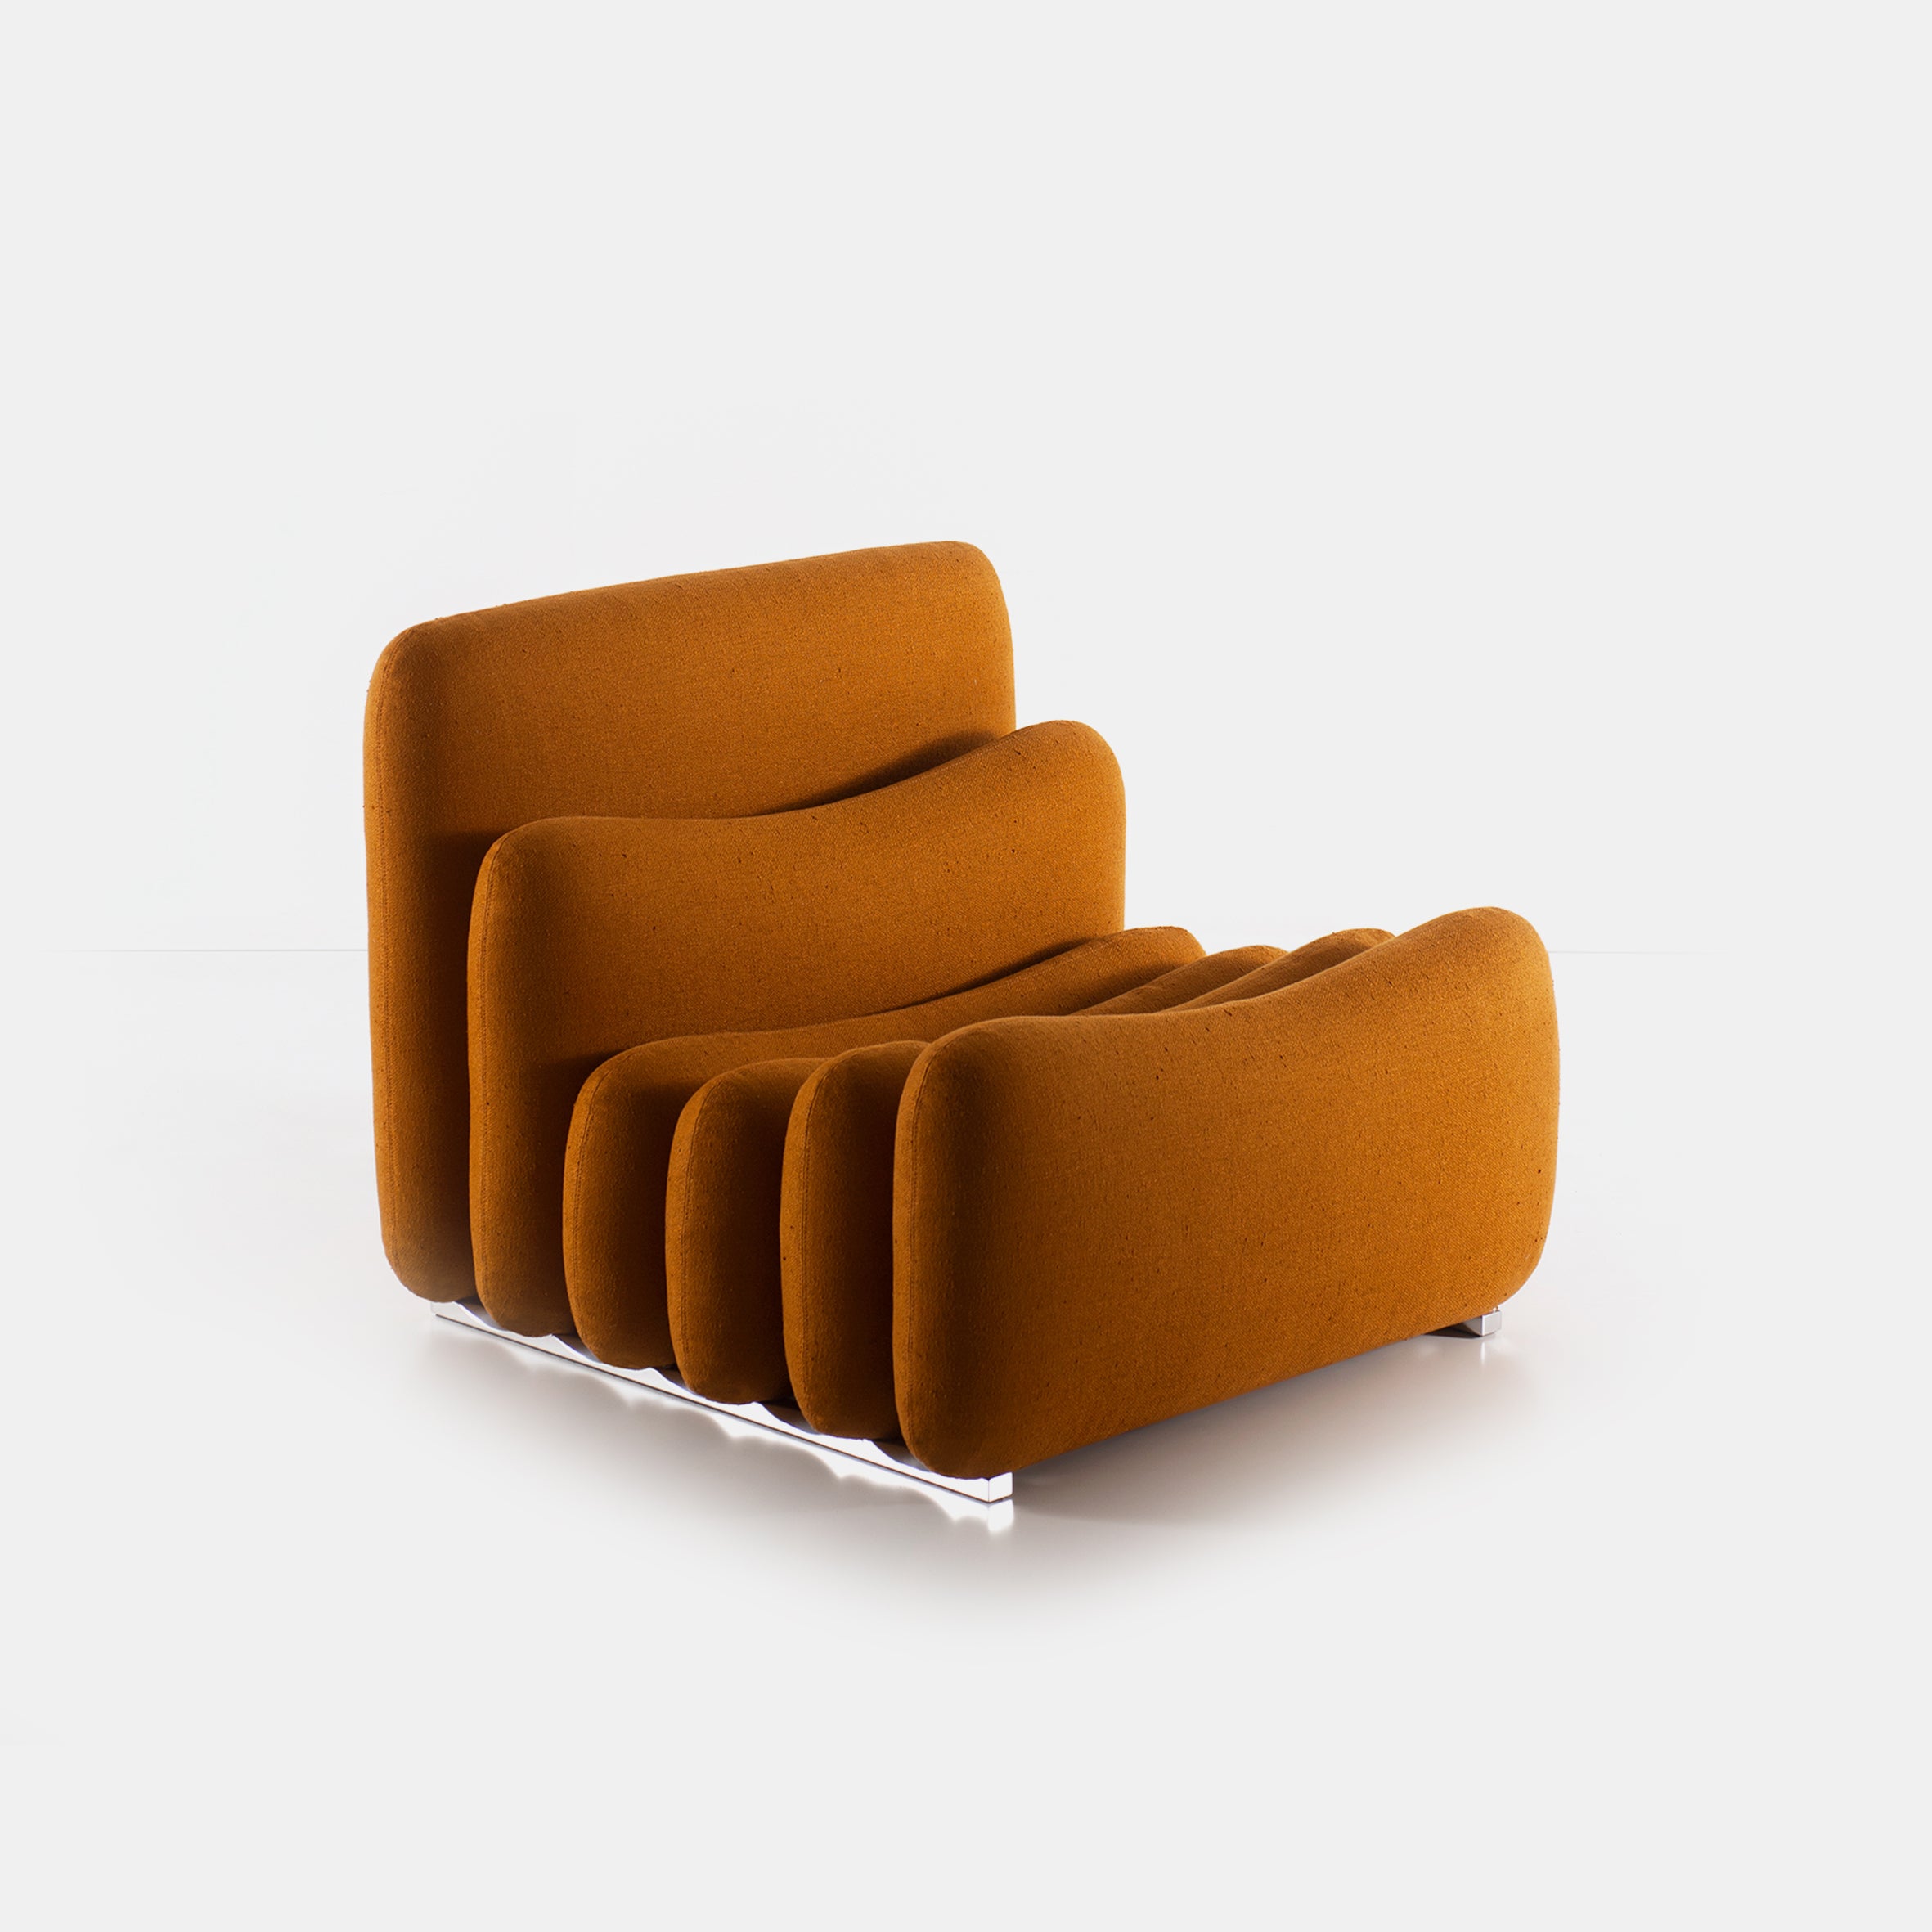 Additional System Lounge Chair